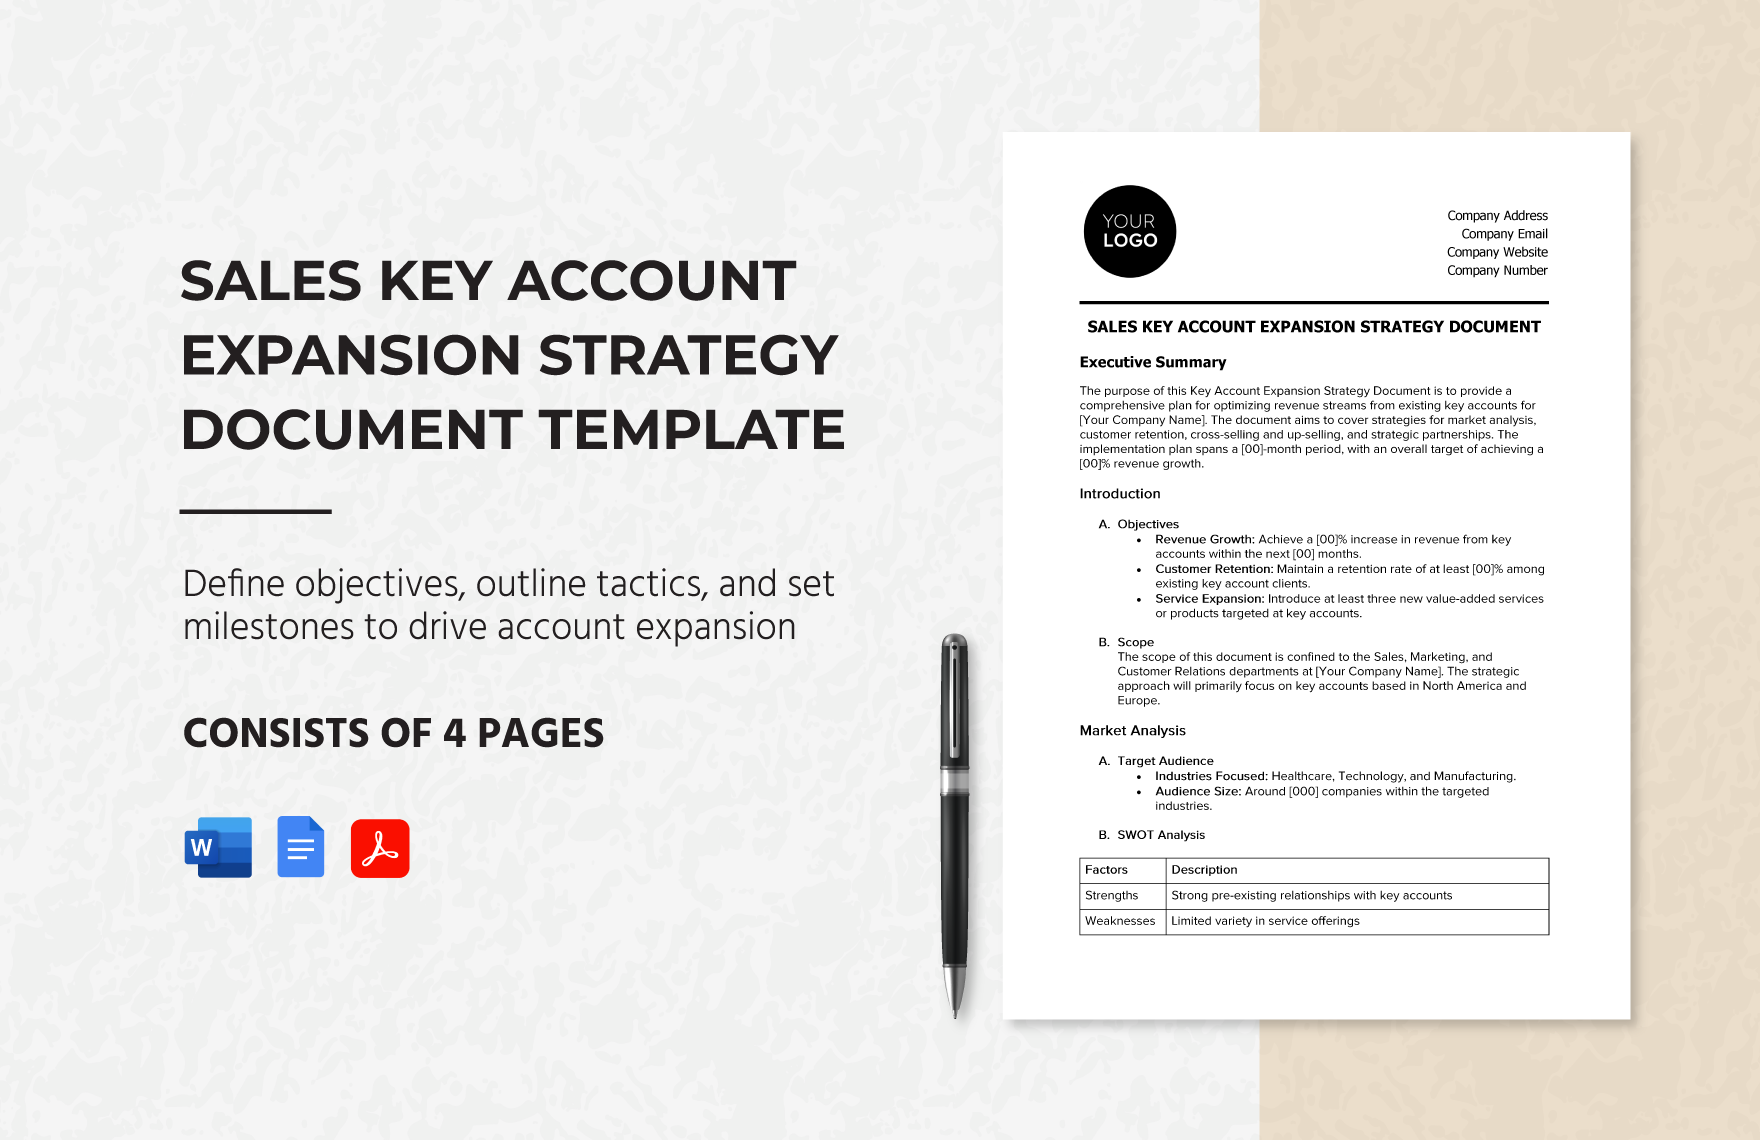 Sales Key Account Expansion Strategy Document Template in Word, Google Docs, PDF